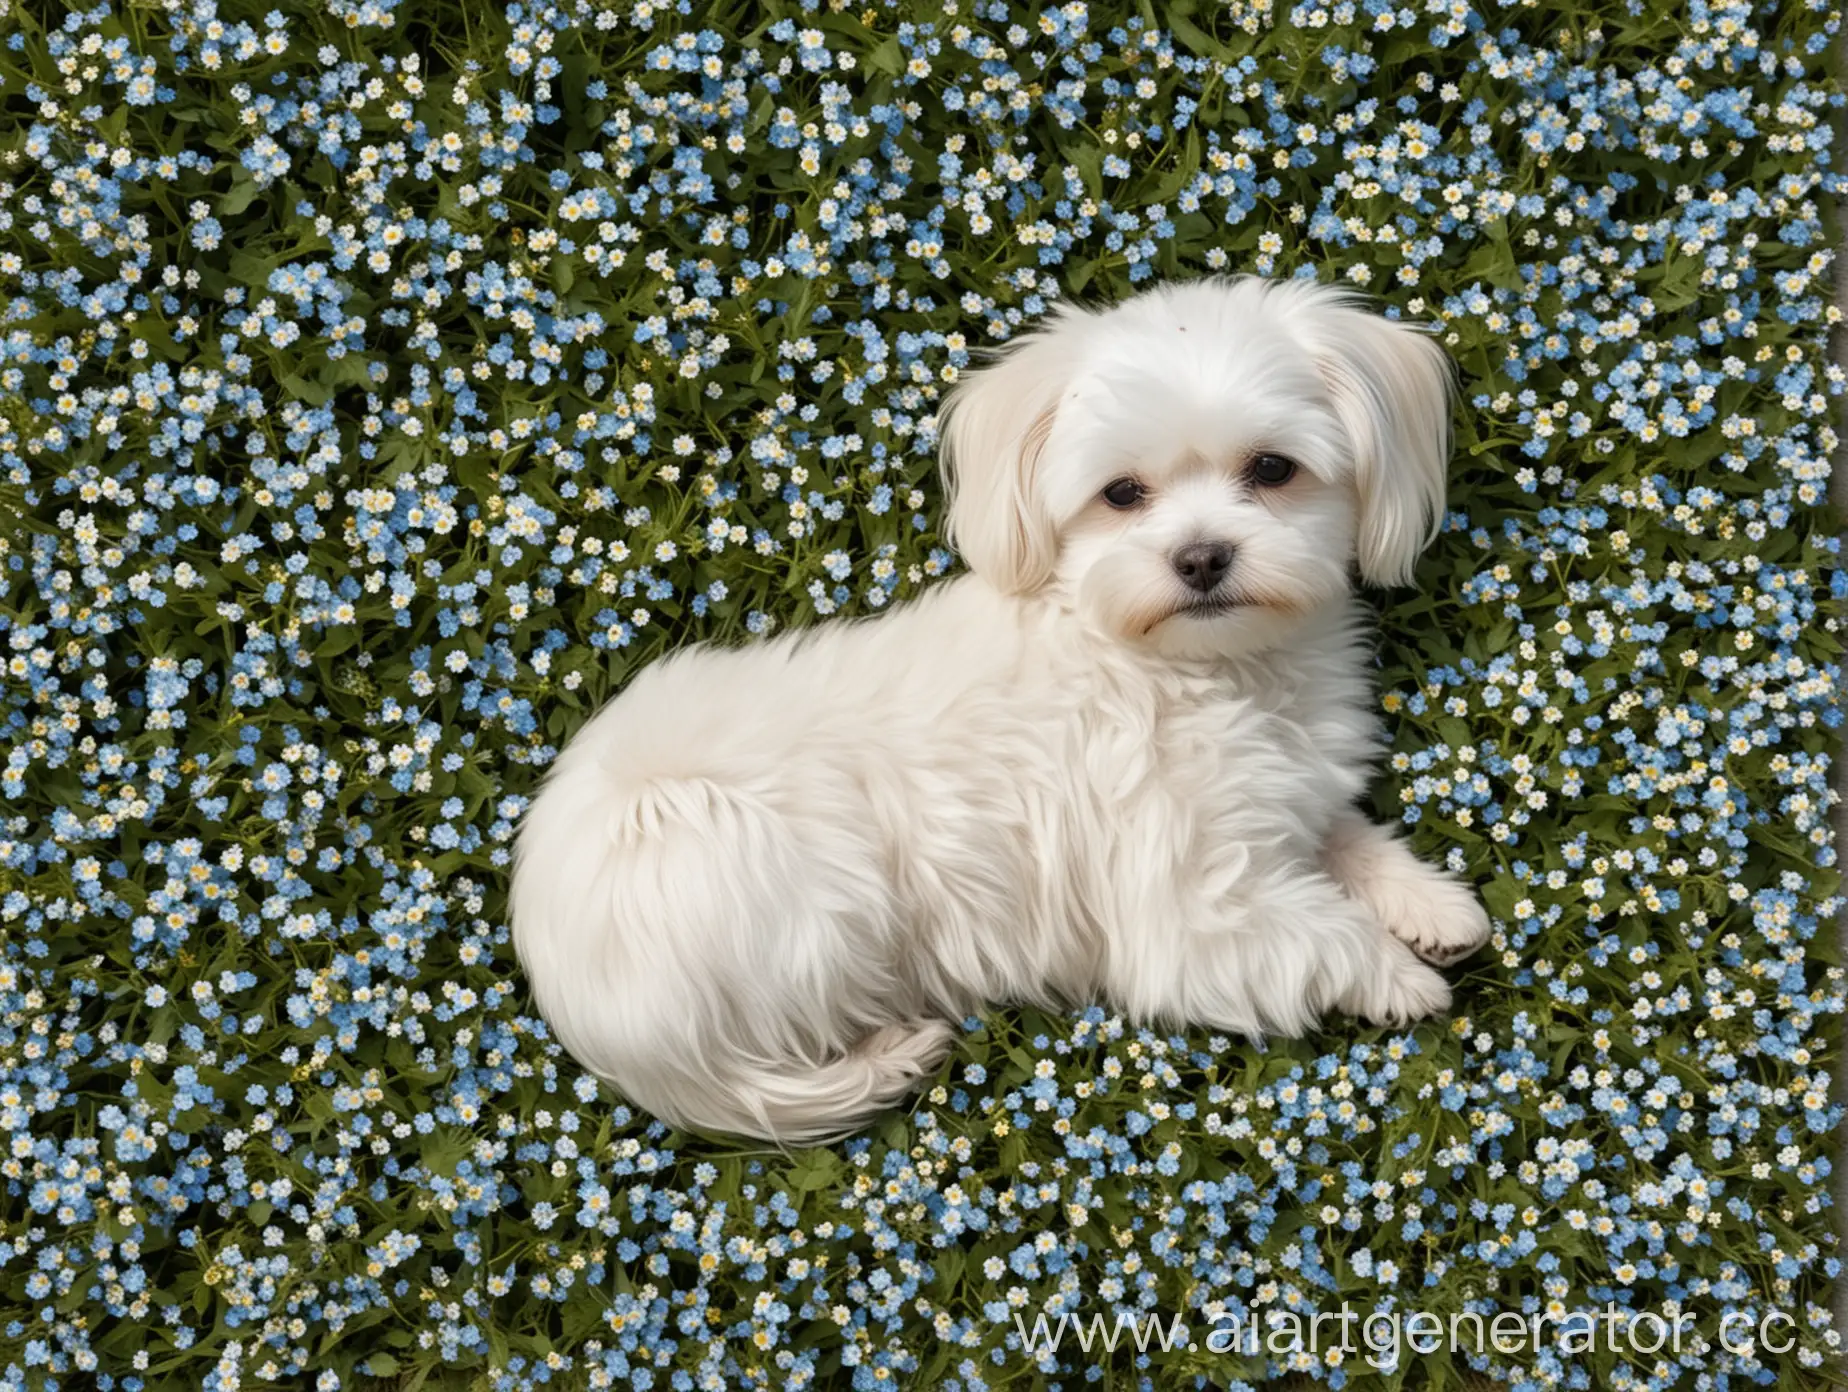 draw a Maltese dog that sleeps on its side (full-length, top view), lying in a field of forget-me-nots